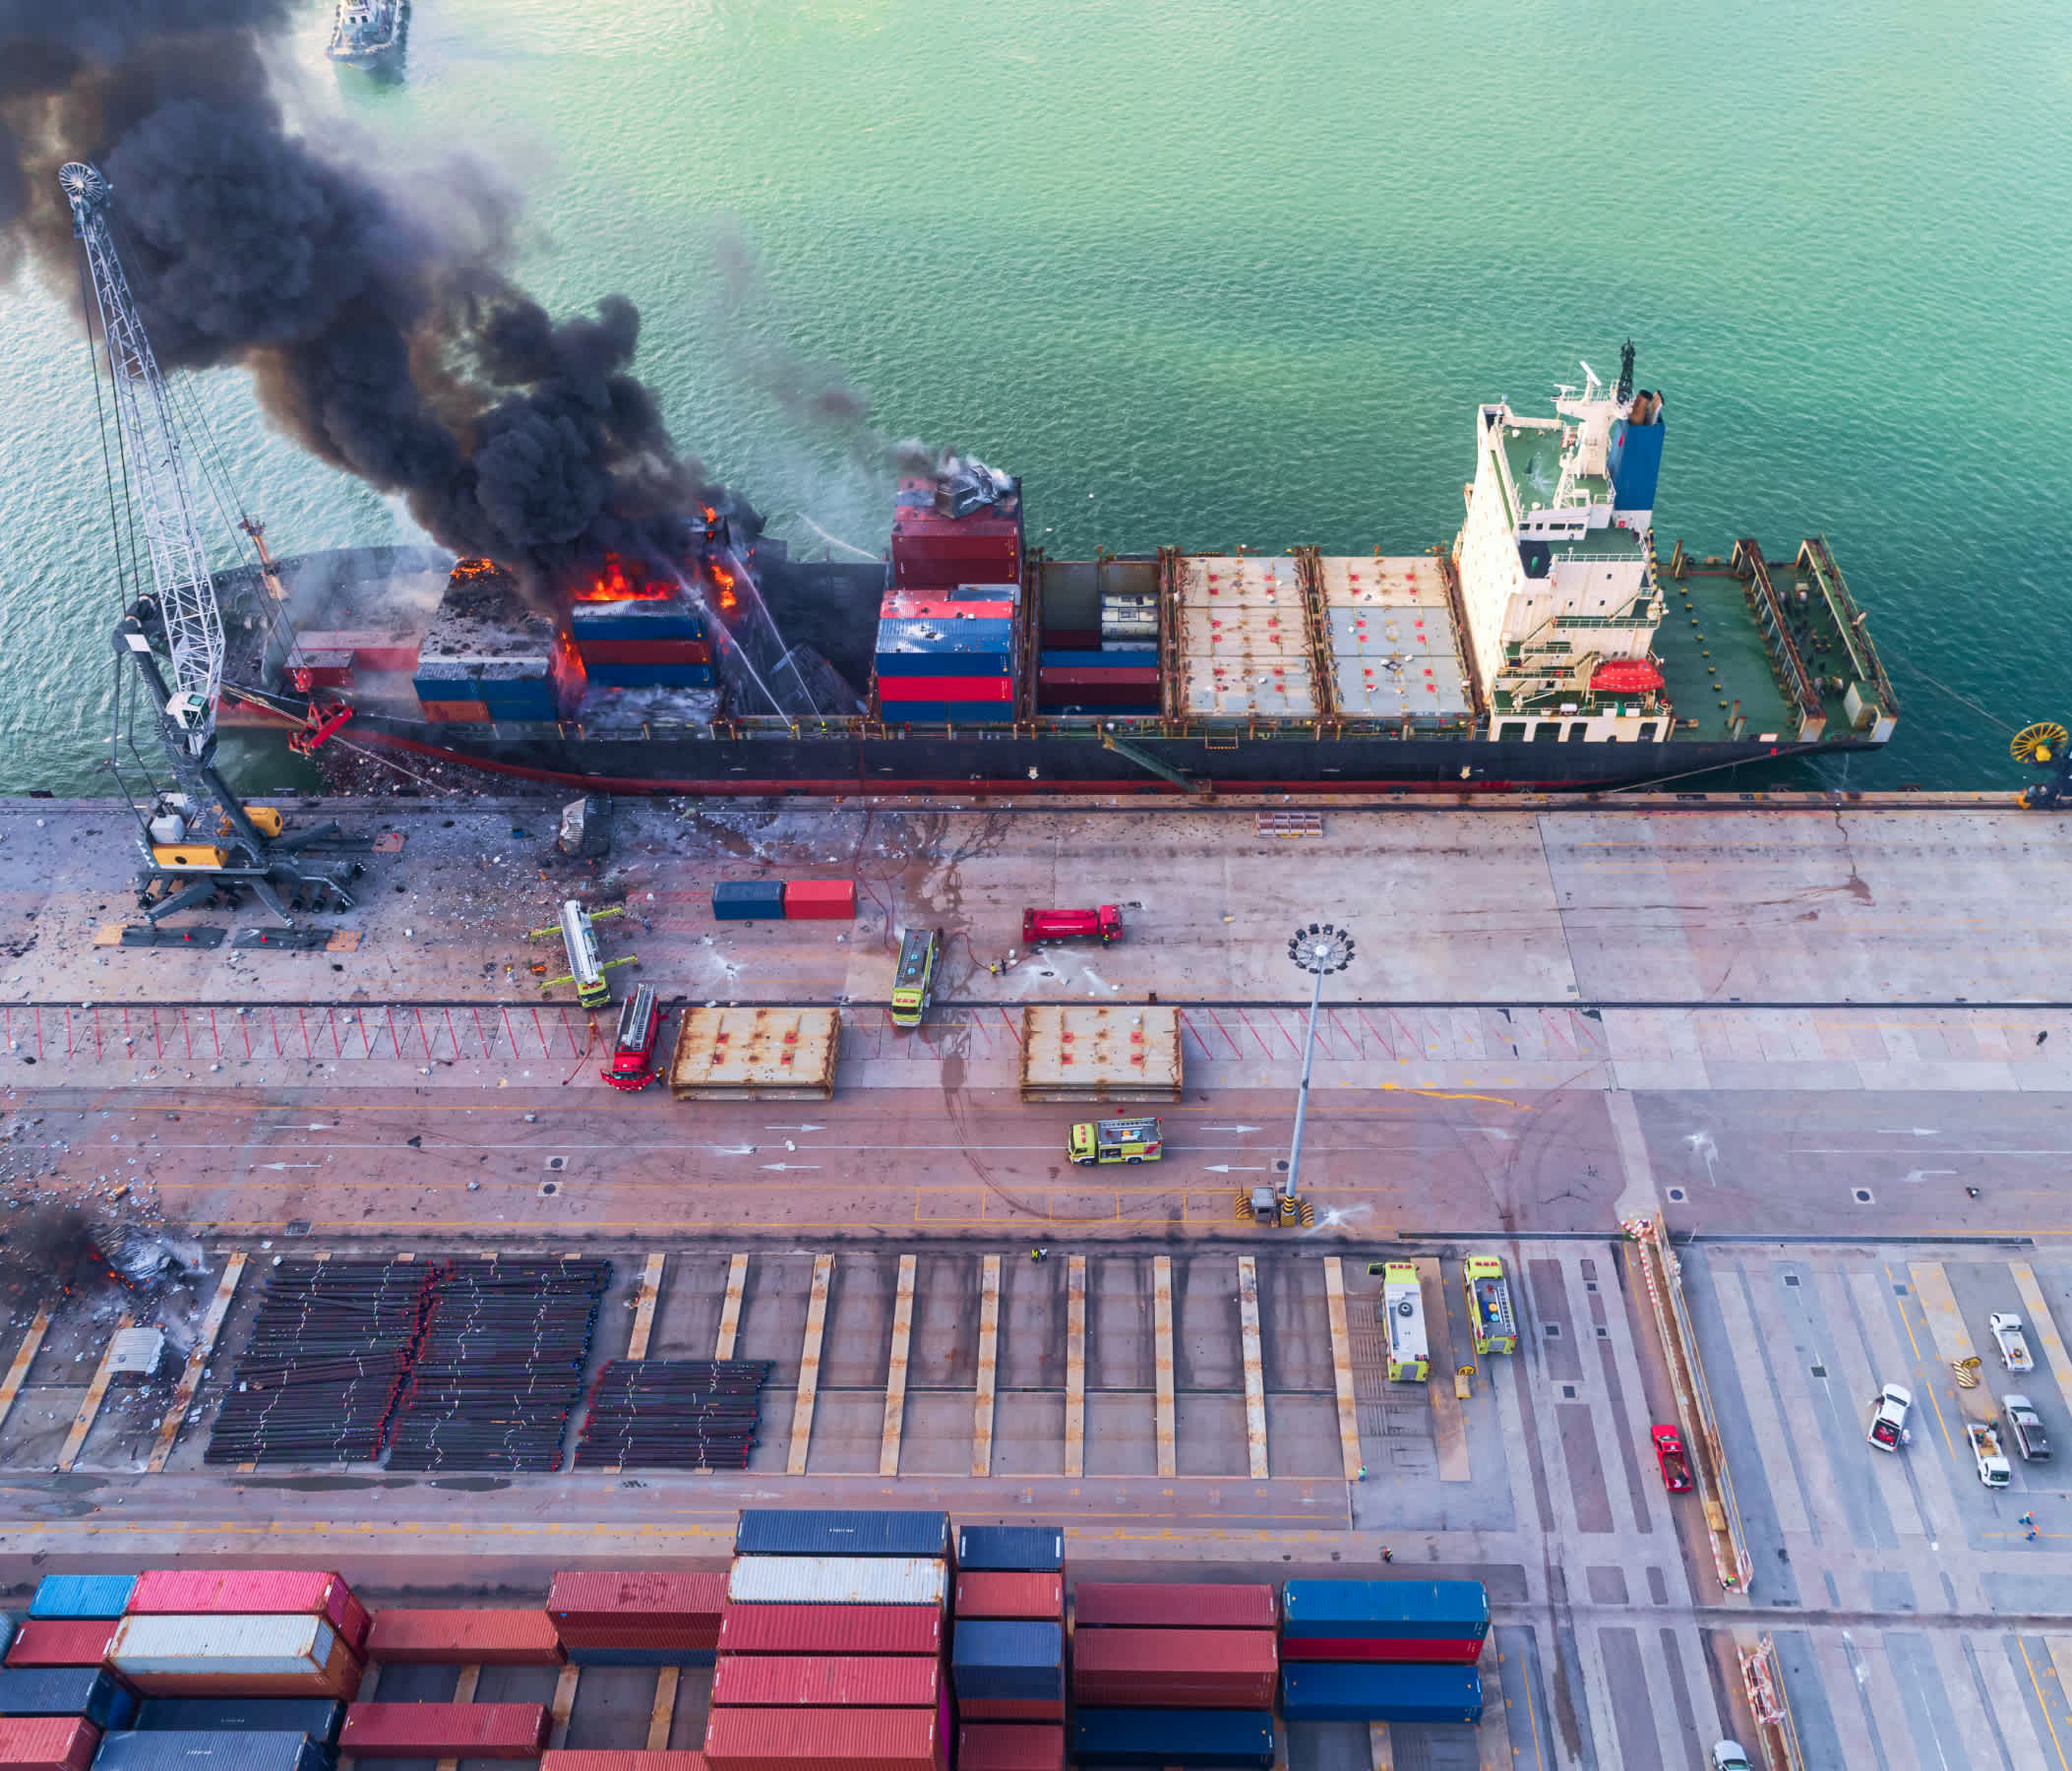 Aerial view of a cargo ship on fire docked at a port with containers onshore